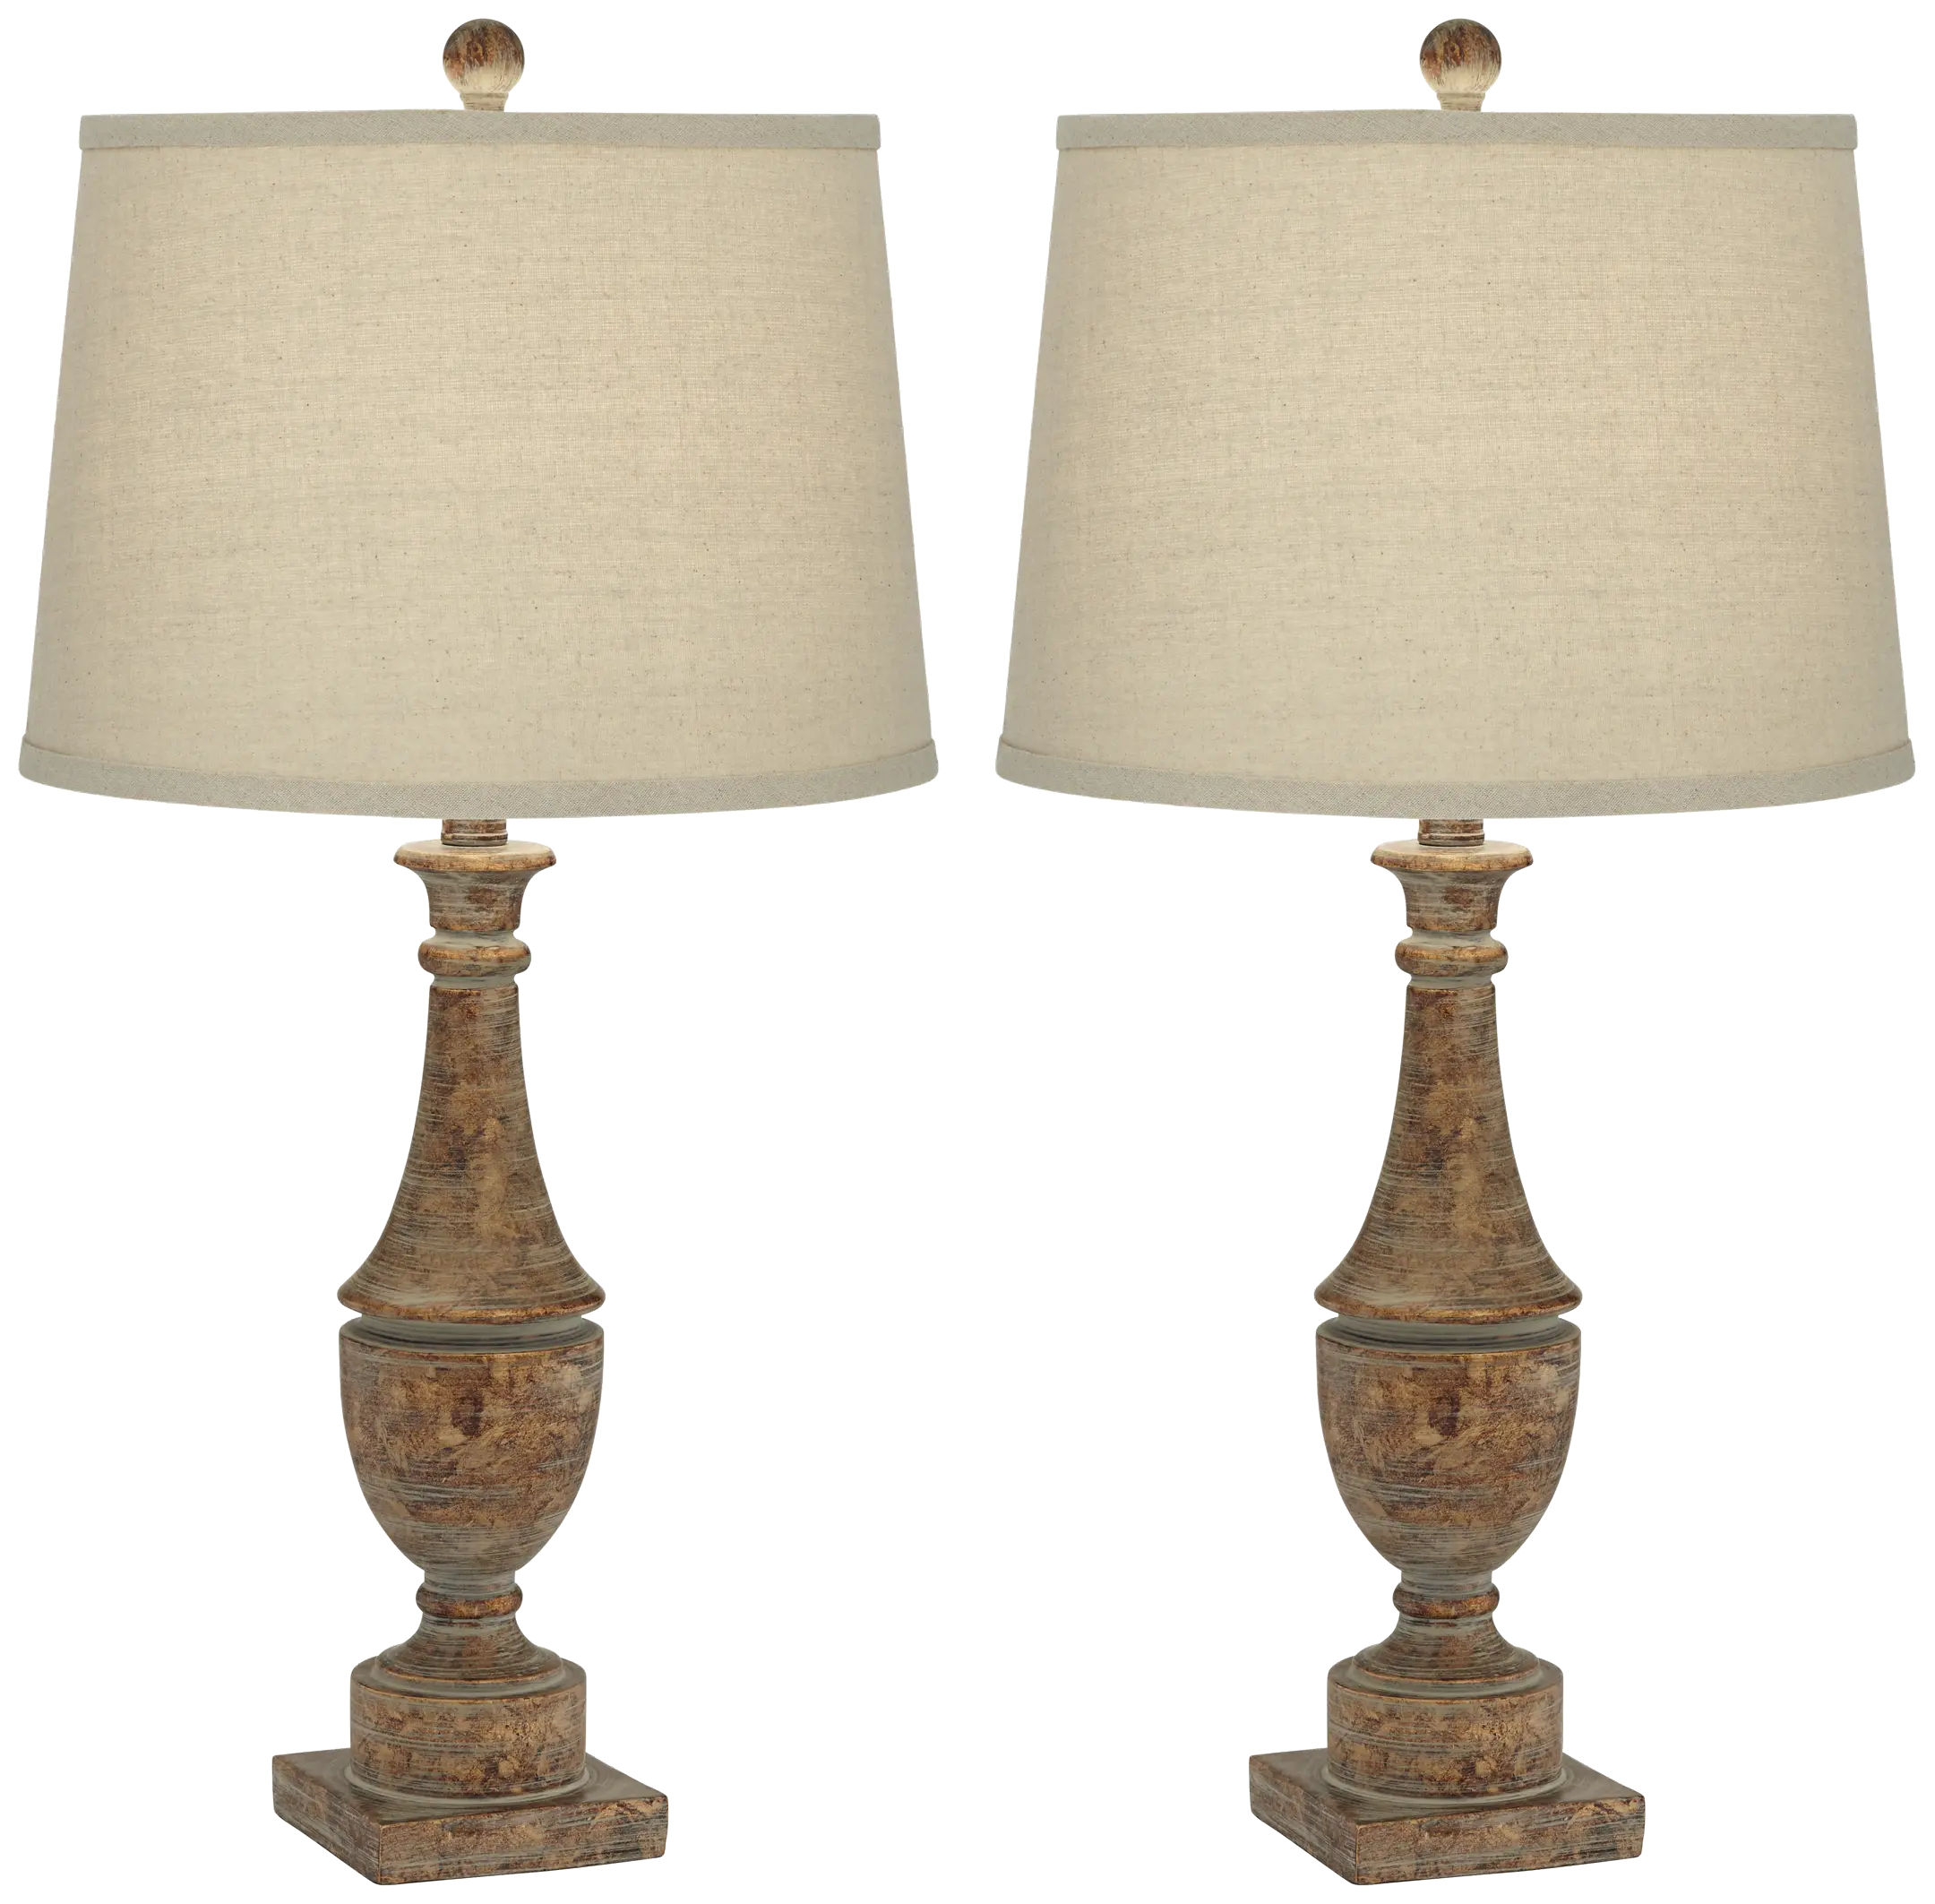 Collier Farmhouse Table Lamps, Set of 2